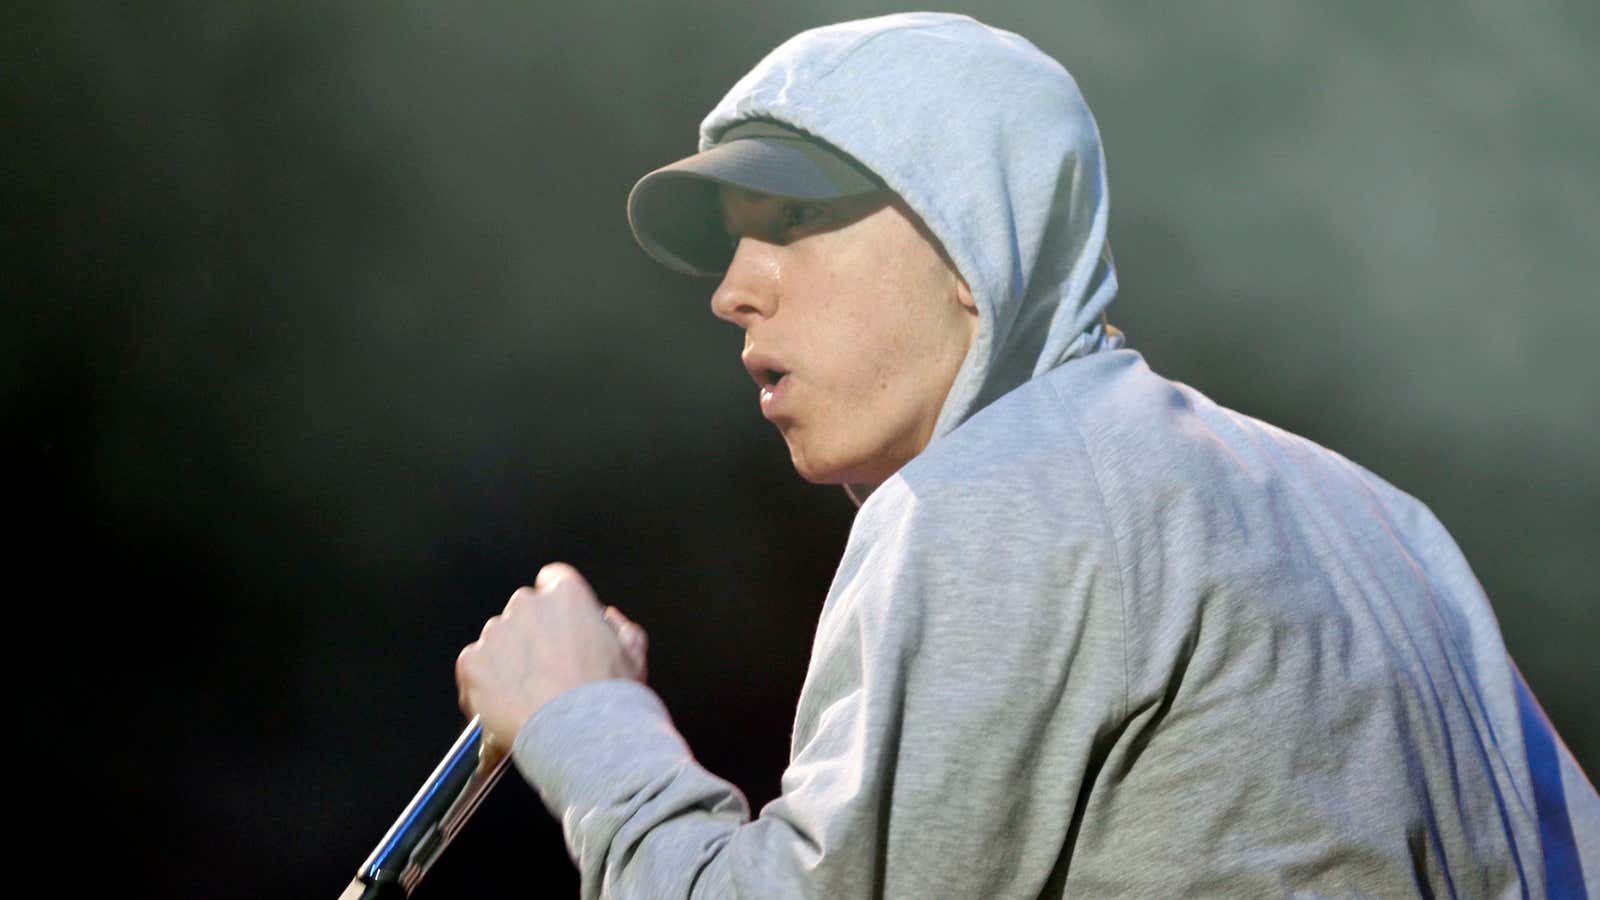 Slim shady just stood up as the rapper with the best vocabulary.